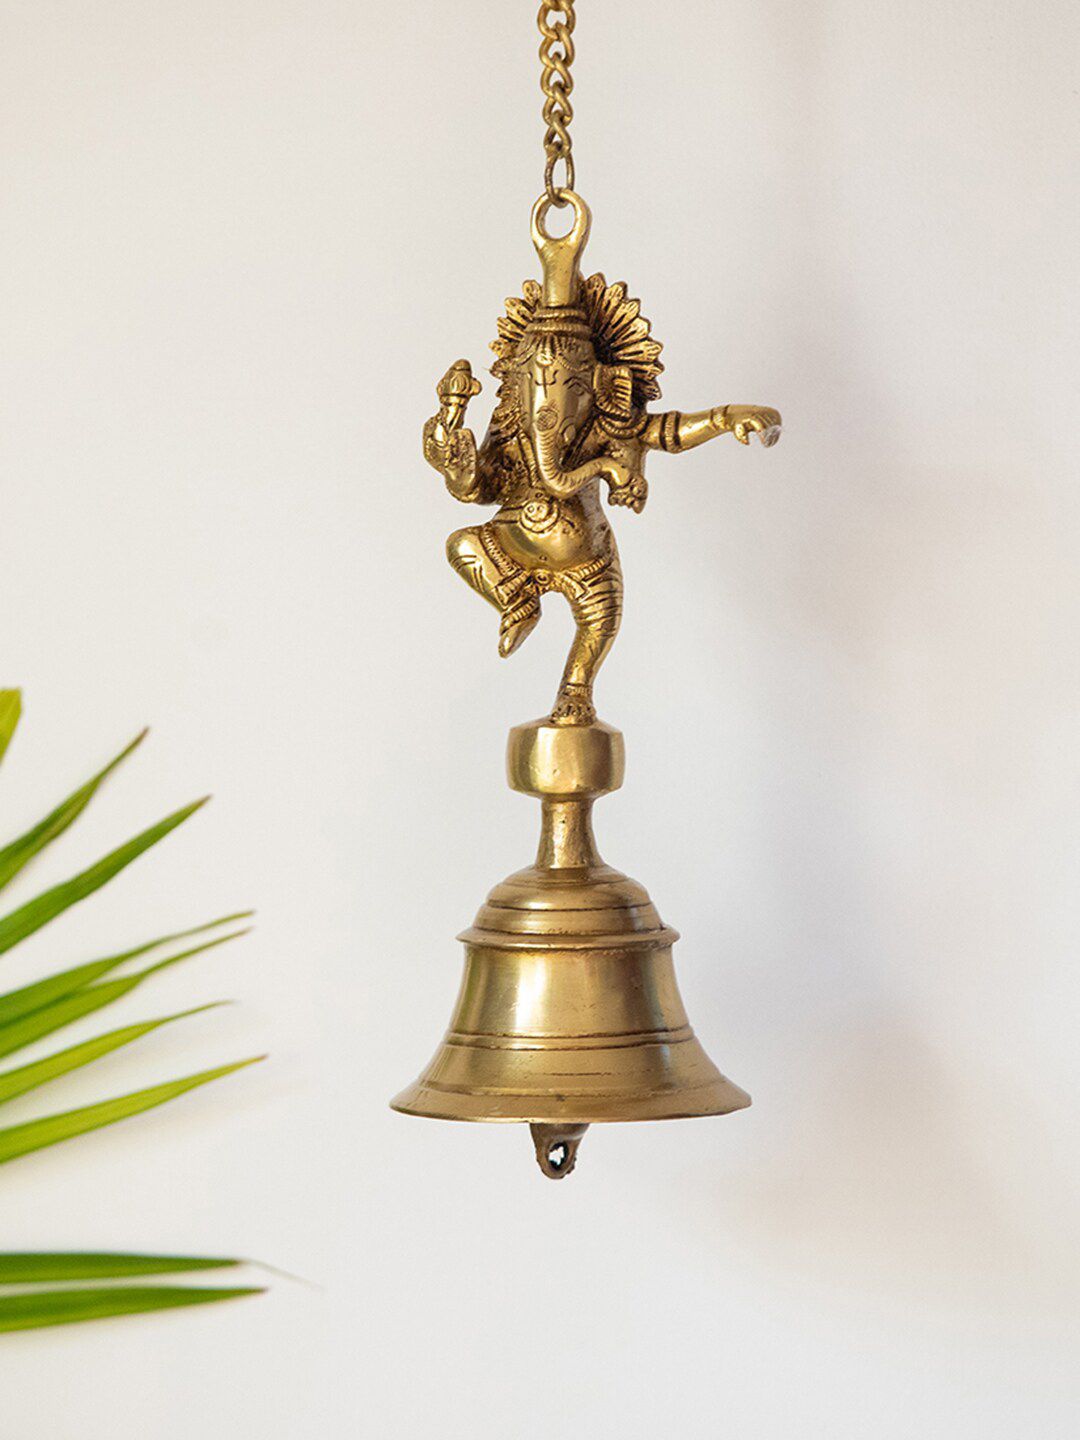 ExclusiveLane Gold-Toned 'Dancing Ganpati' Hand-Etched Decorative Hanging Bell Price in India